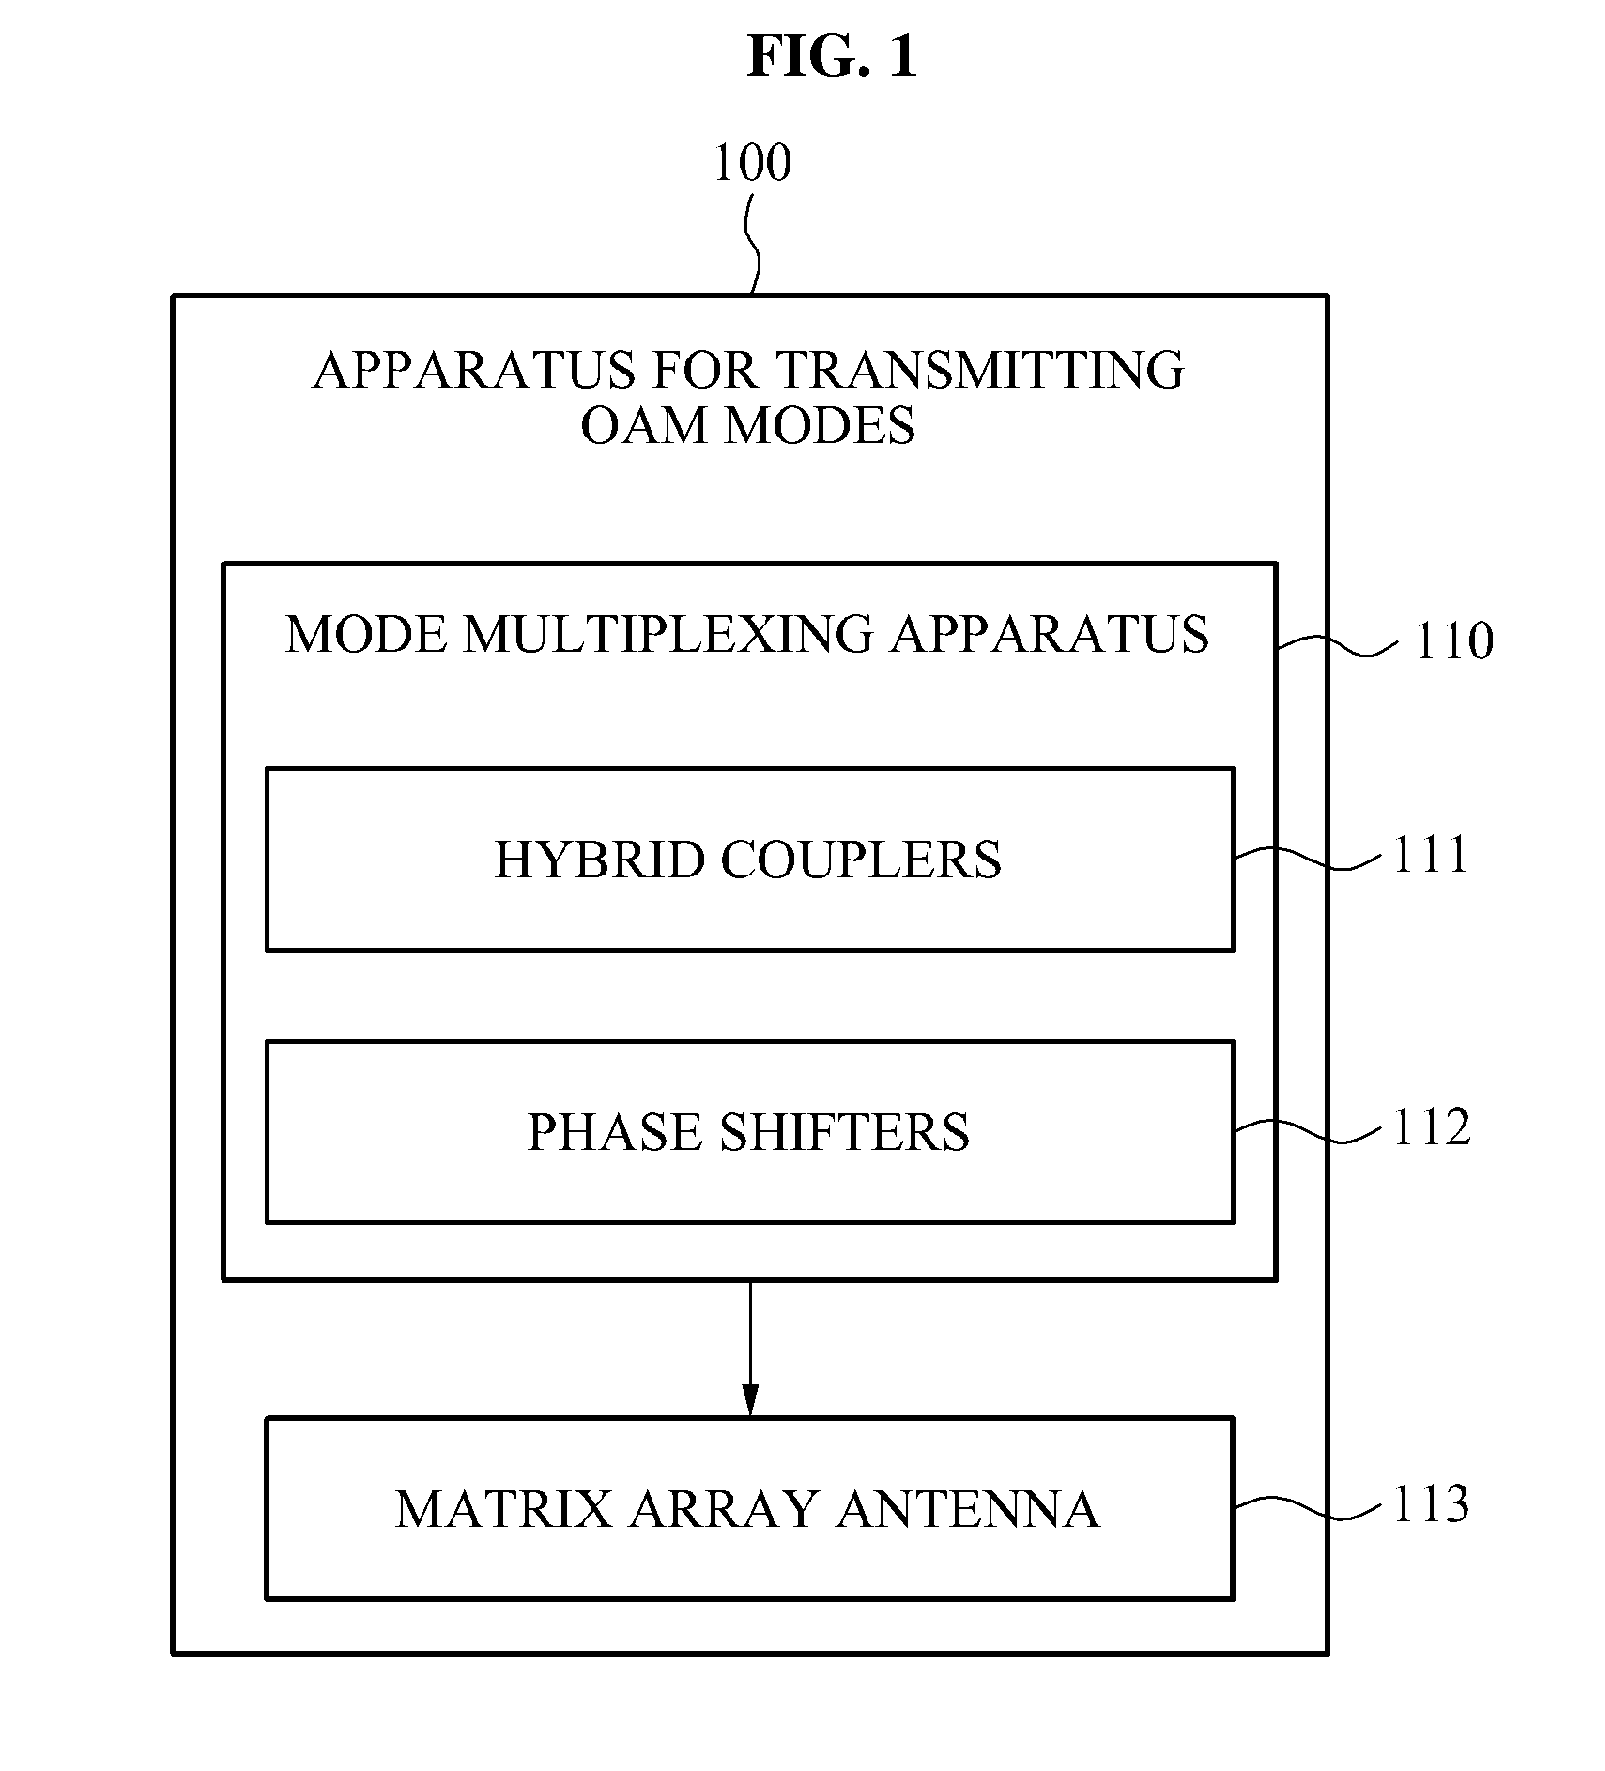 Apparatus and method for simultaneously transmitting and receiving orbital angular momentum (OAM) modes